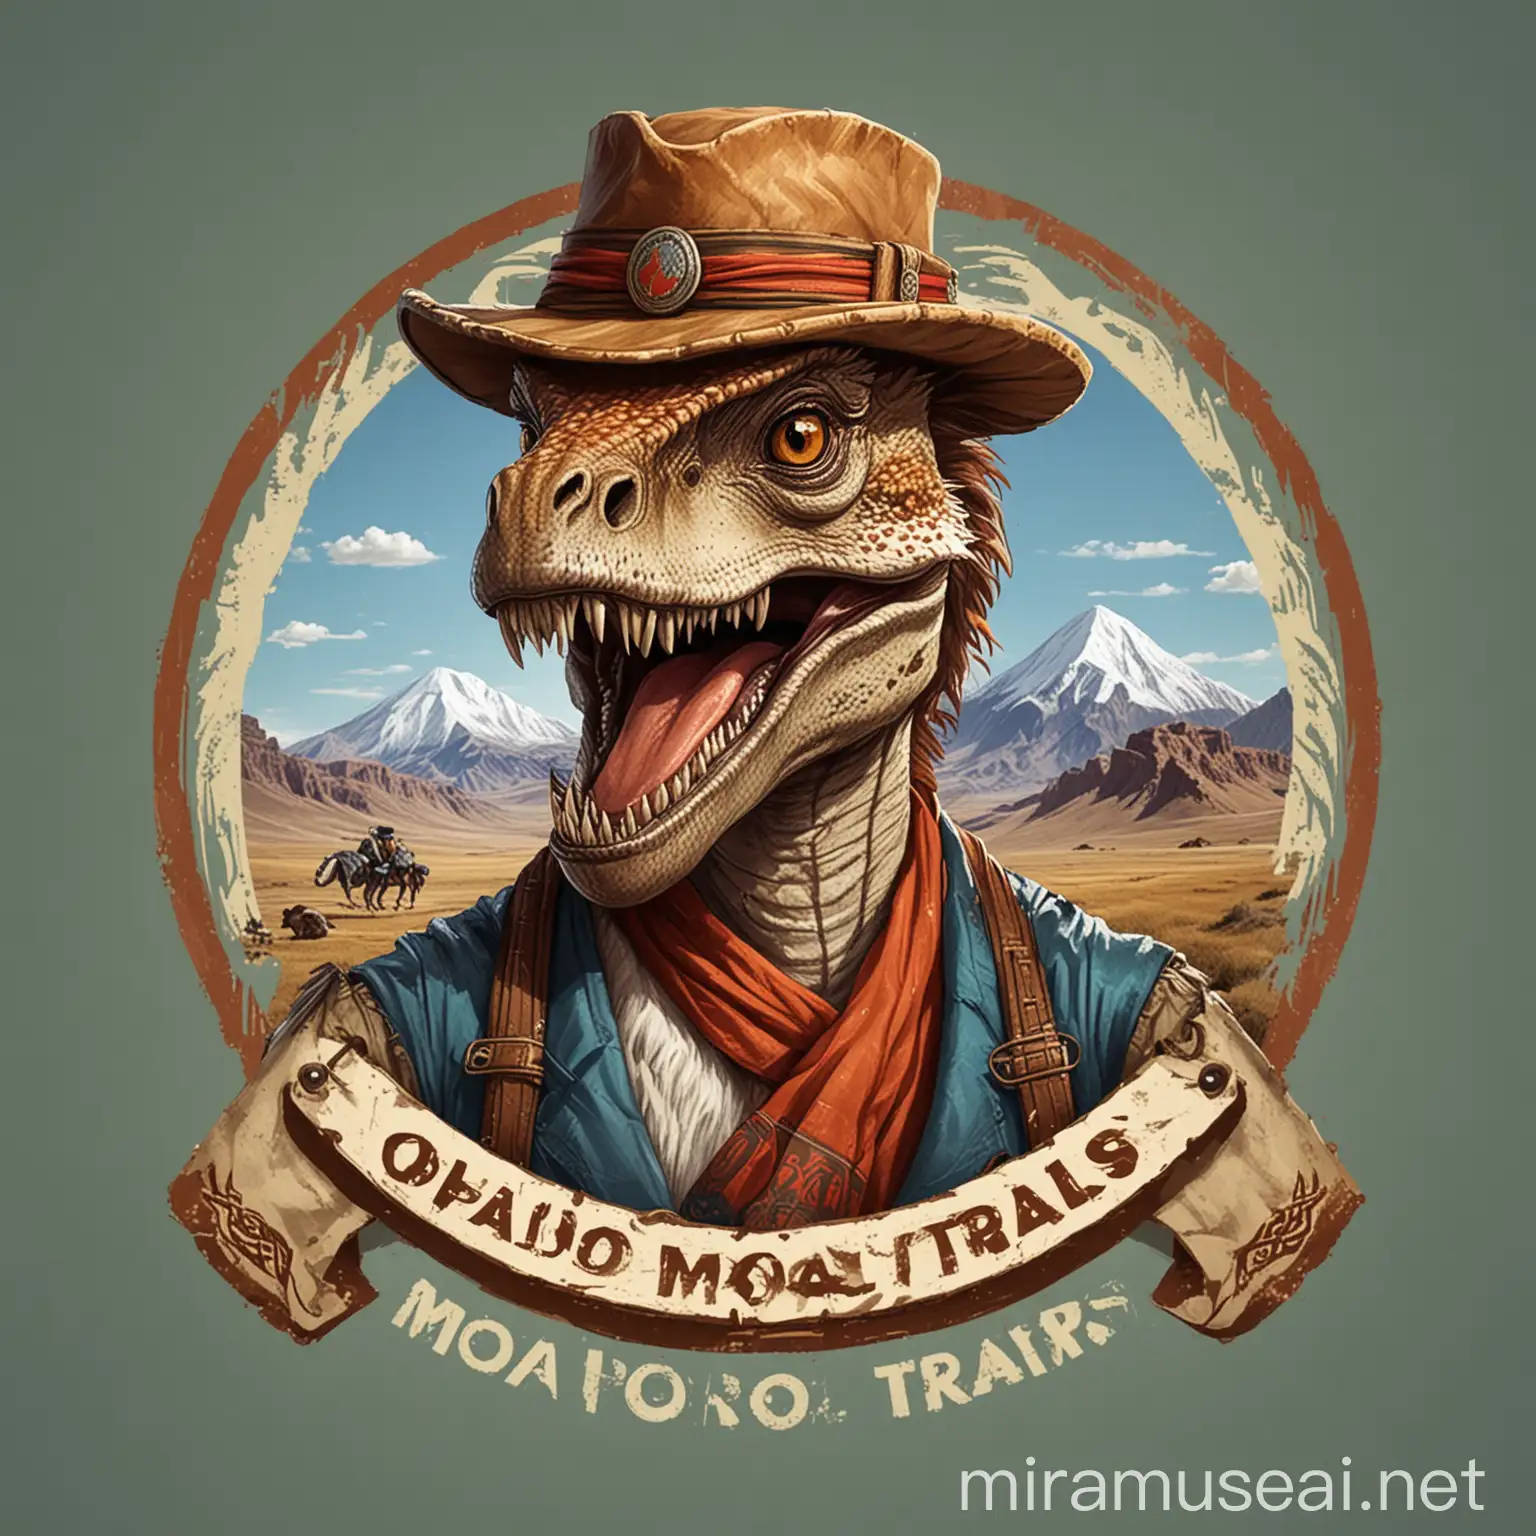 generate a logo for travel agency where very firendly velociraptor wearing traditional mongolian deel smiling, include company name raptor trails